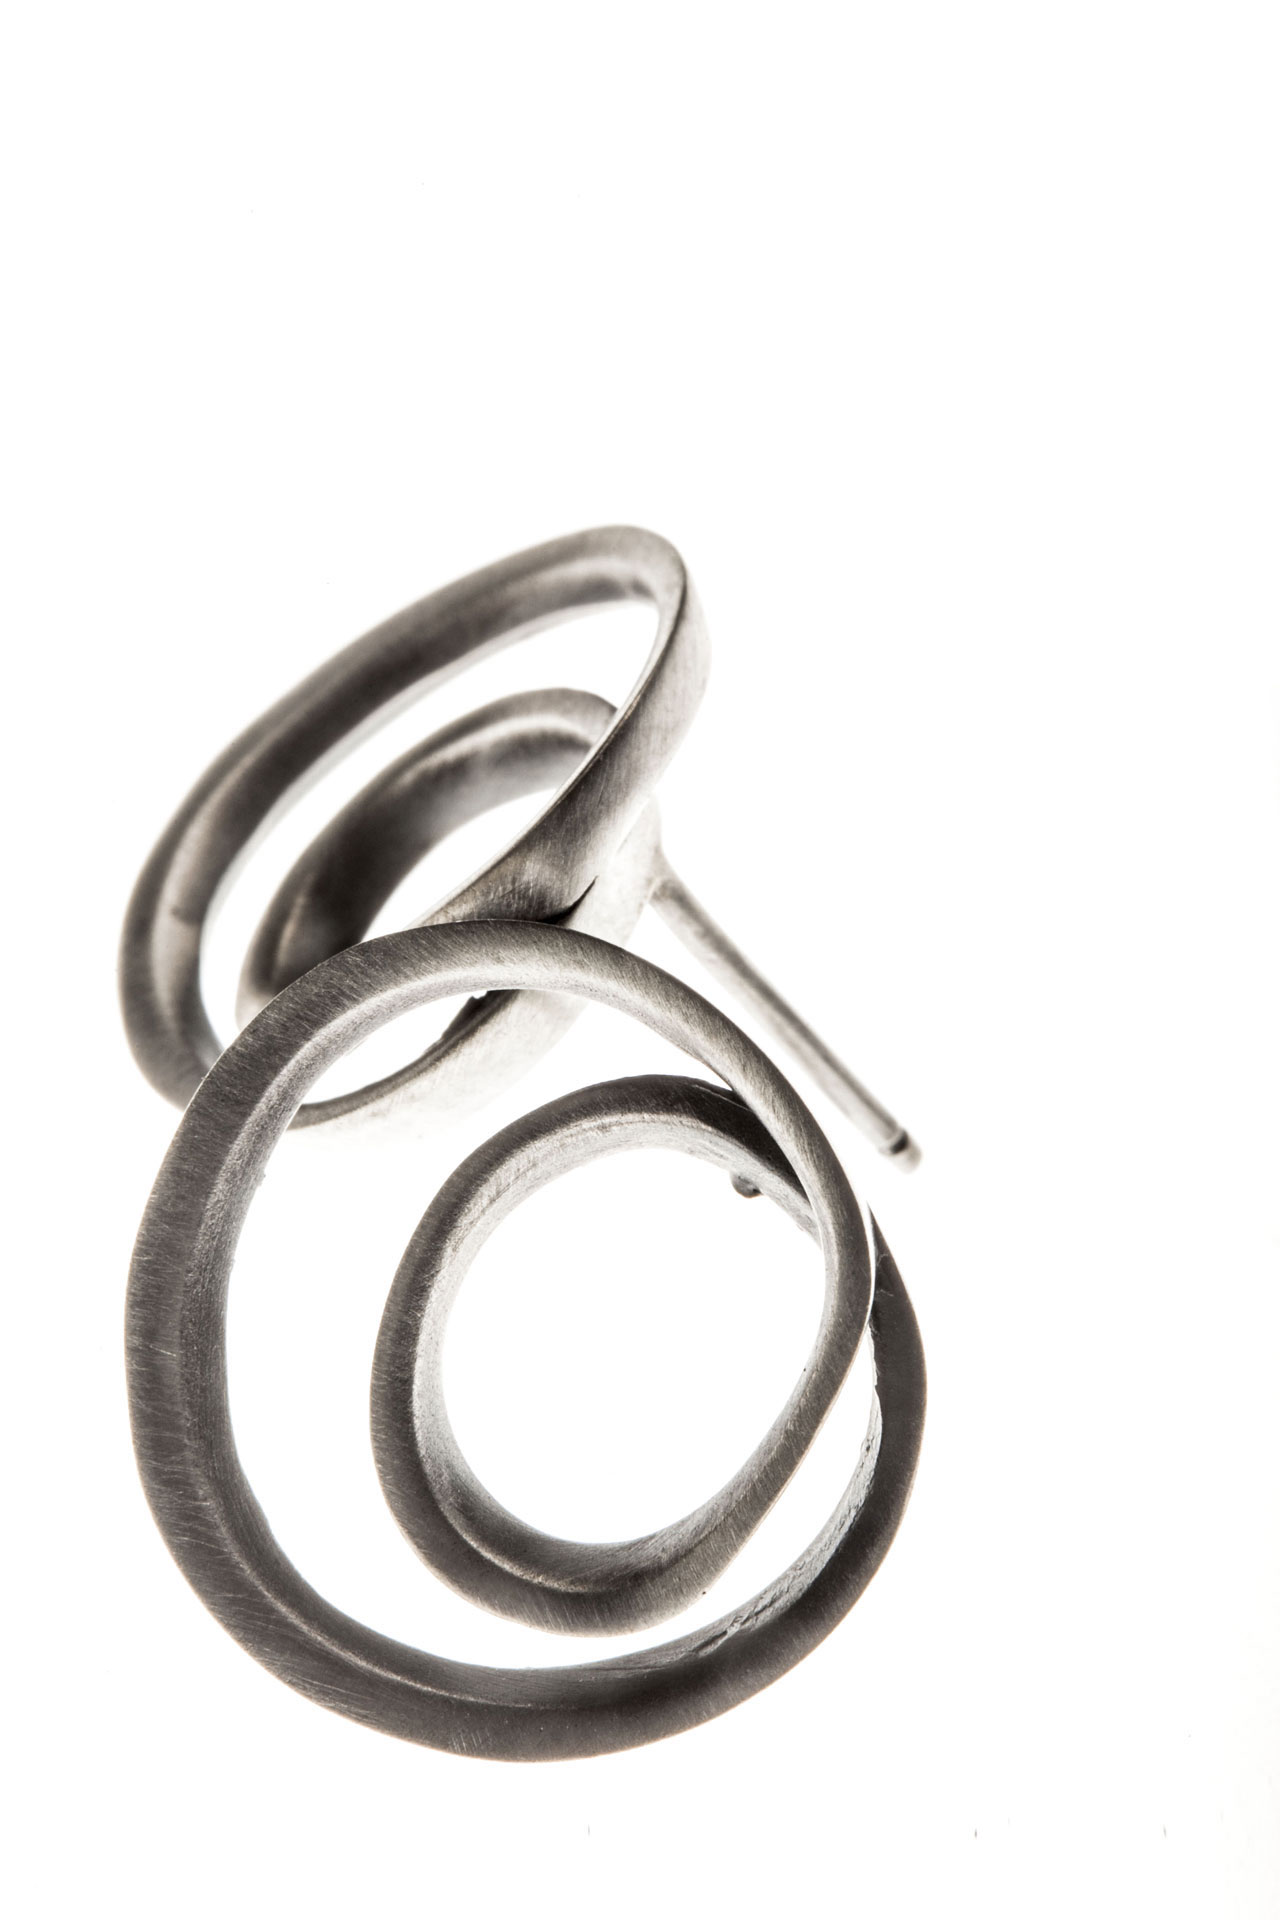 Aines handmade Jewellery - Labyrinth Collection - Silver earrings.